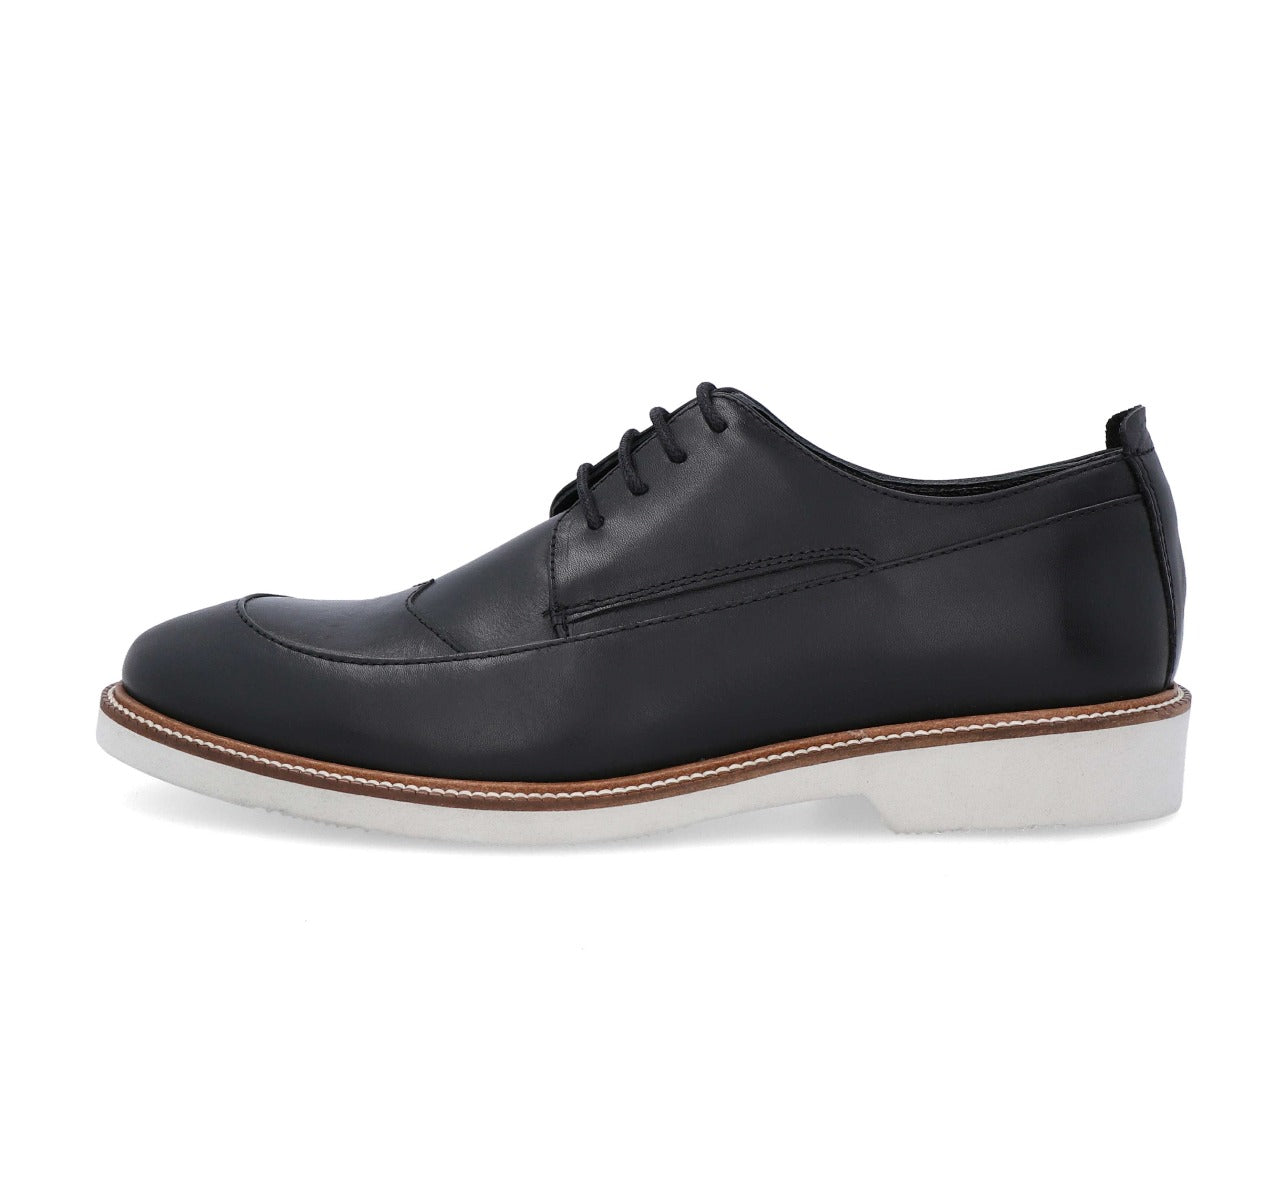 Barefoot Black Lace Up with White Sole For Men 6133